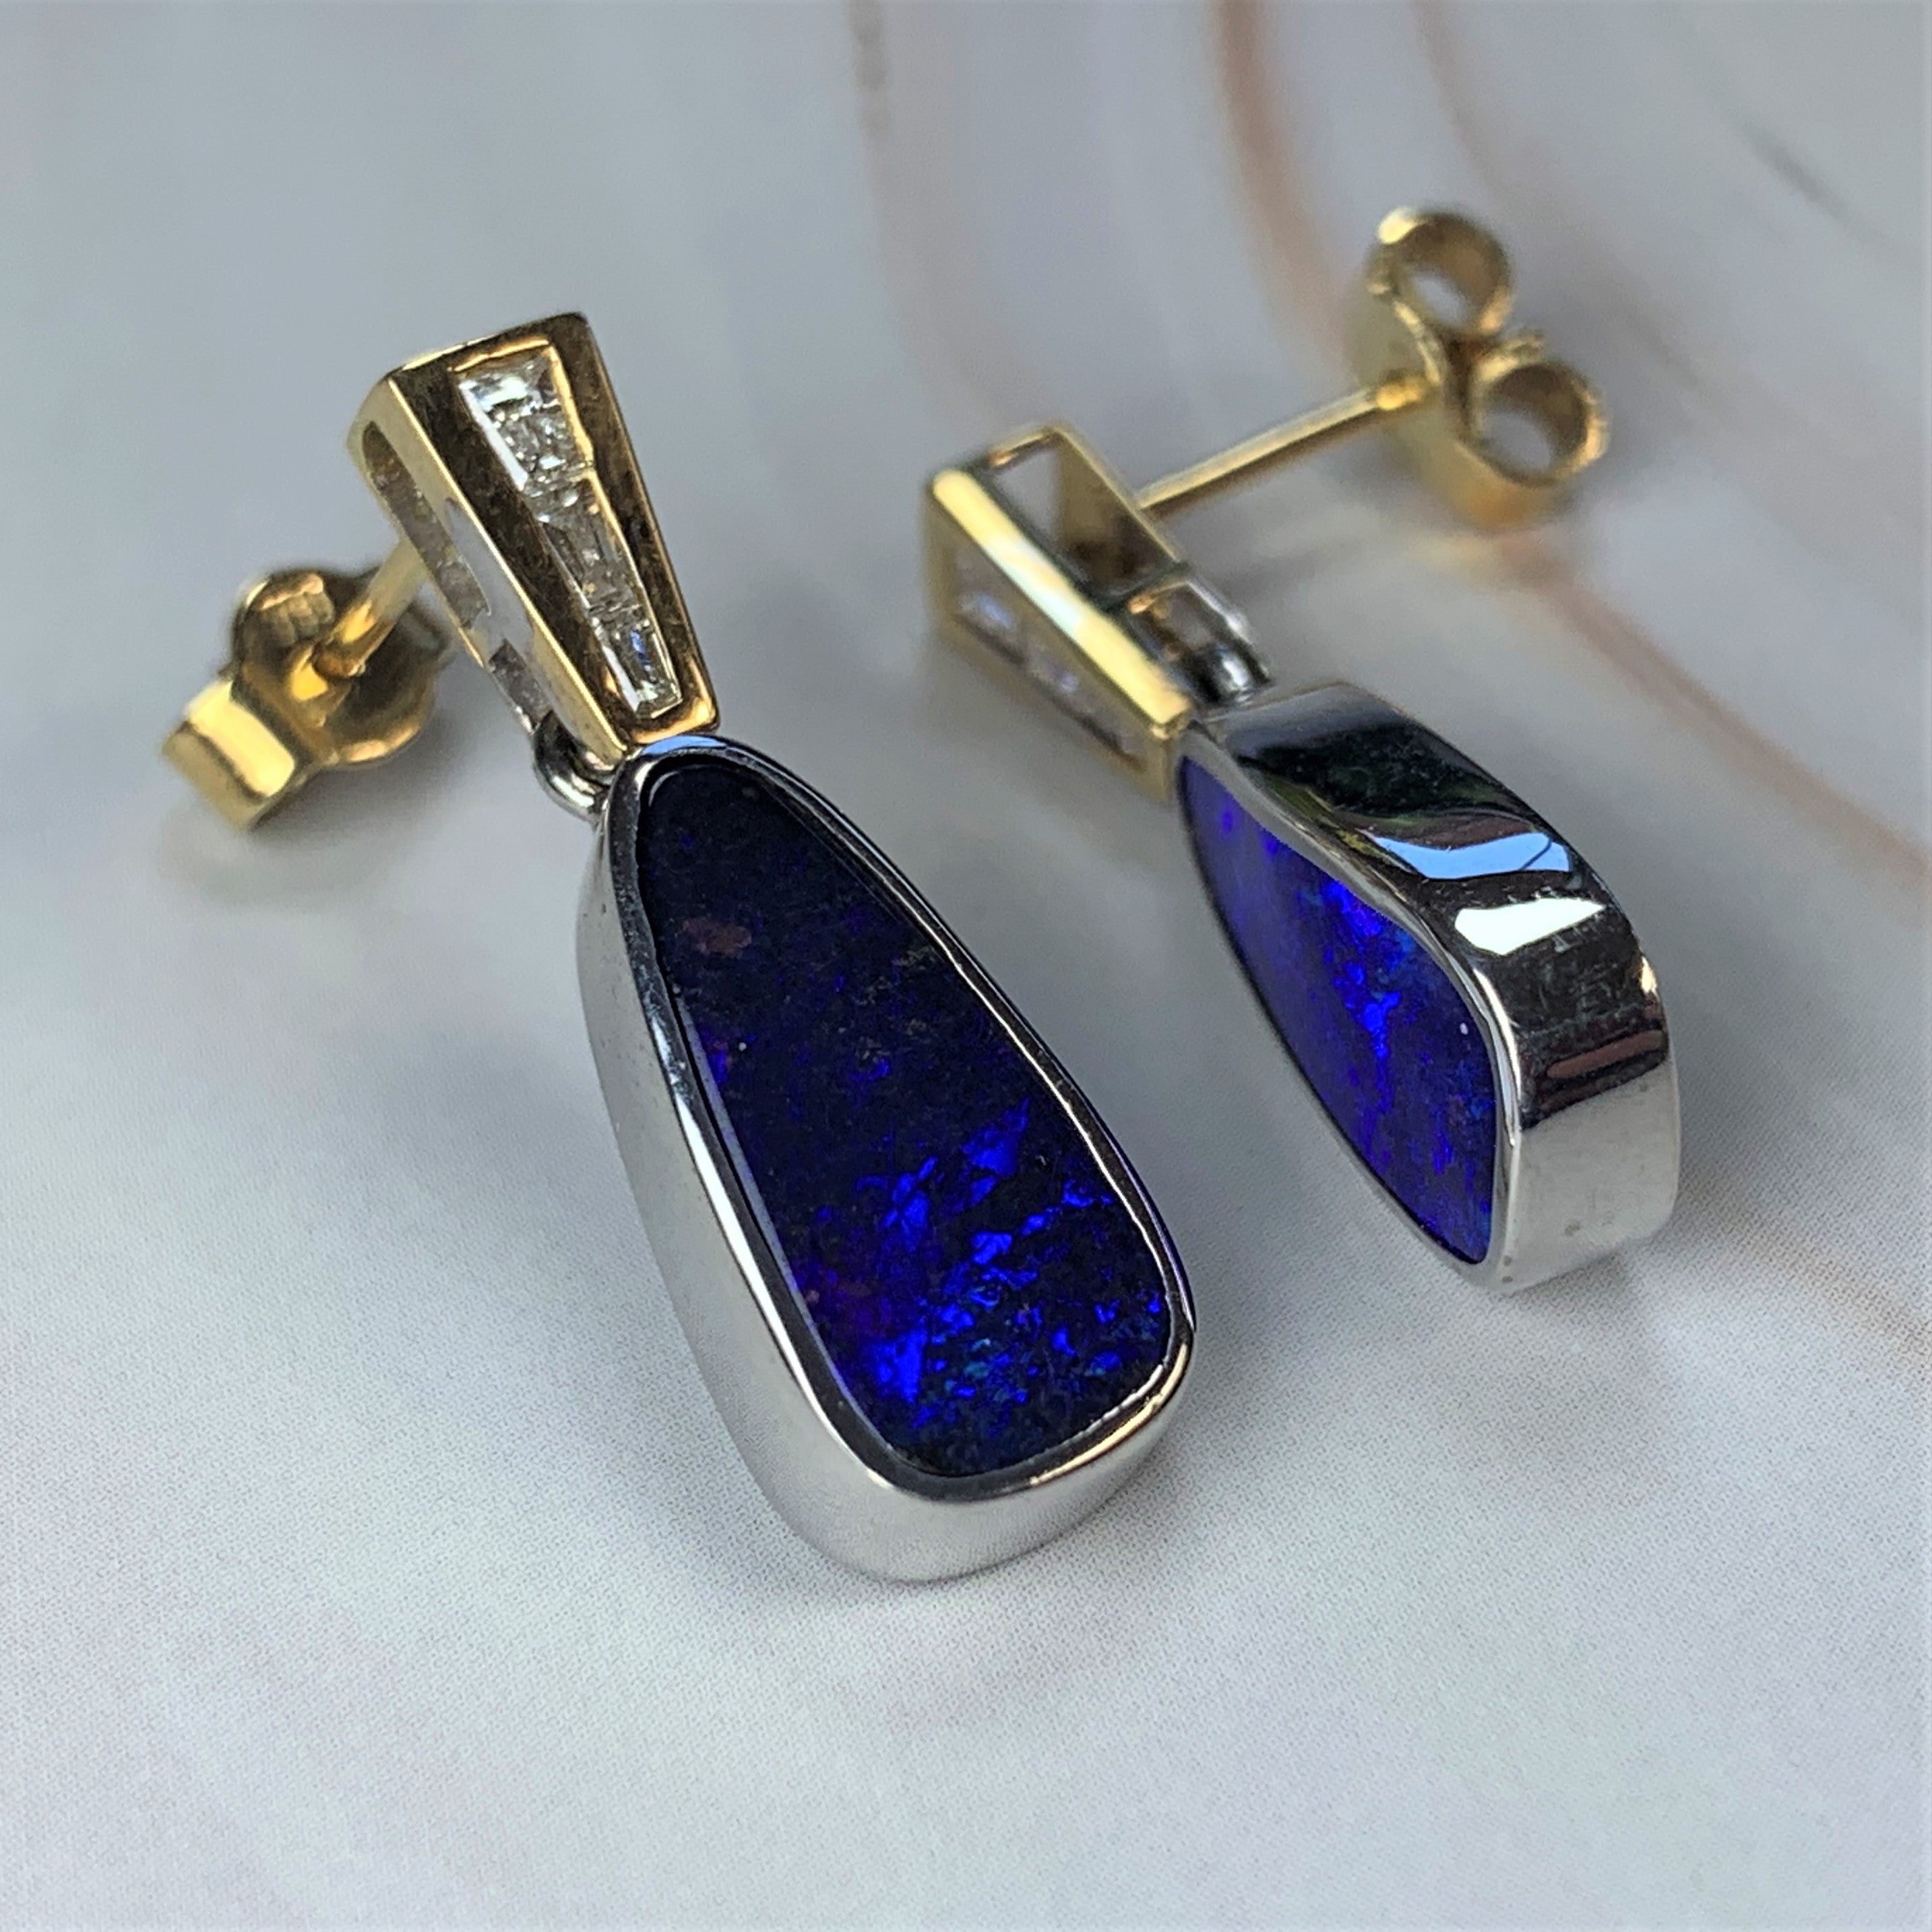 18kt Yellow and White Gold dangling Boulder Opal and Diamond earrings - Masterpiece Jewellery Opal & Gems Sydney Australia | Online Shop